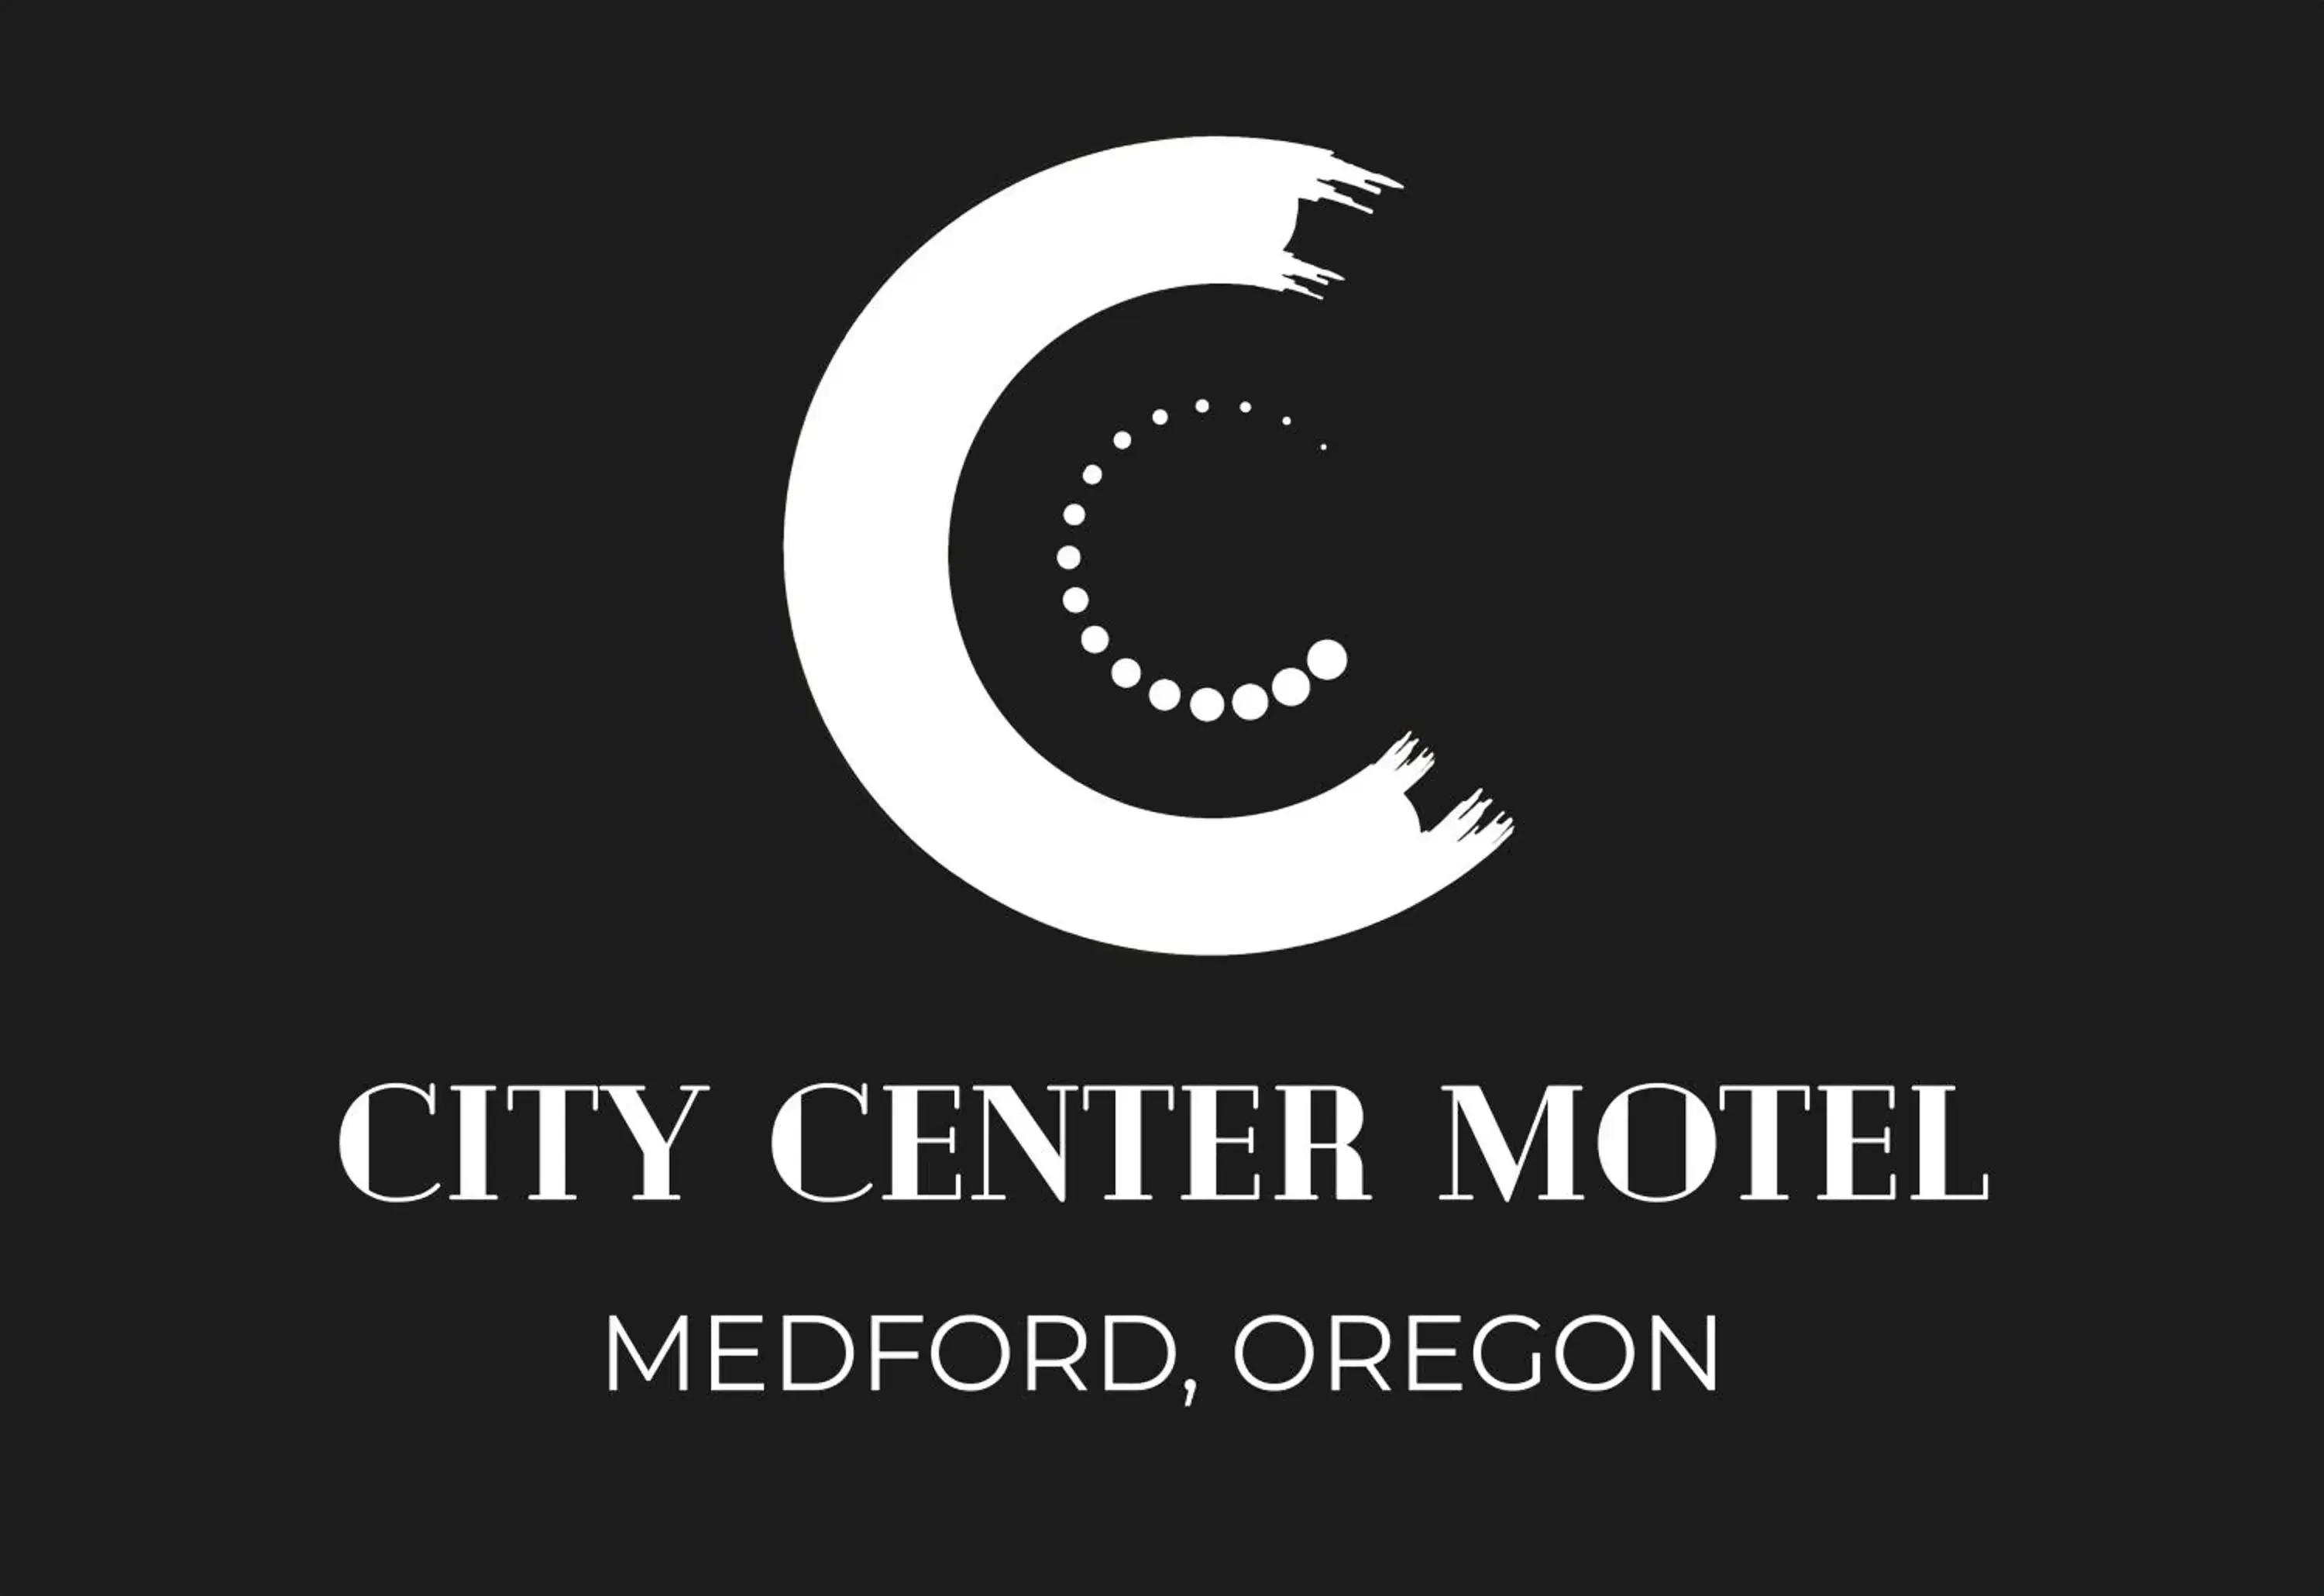 Property logo or sign in City Center Motel